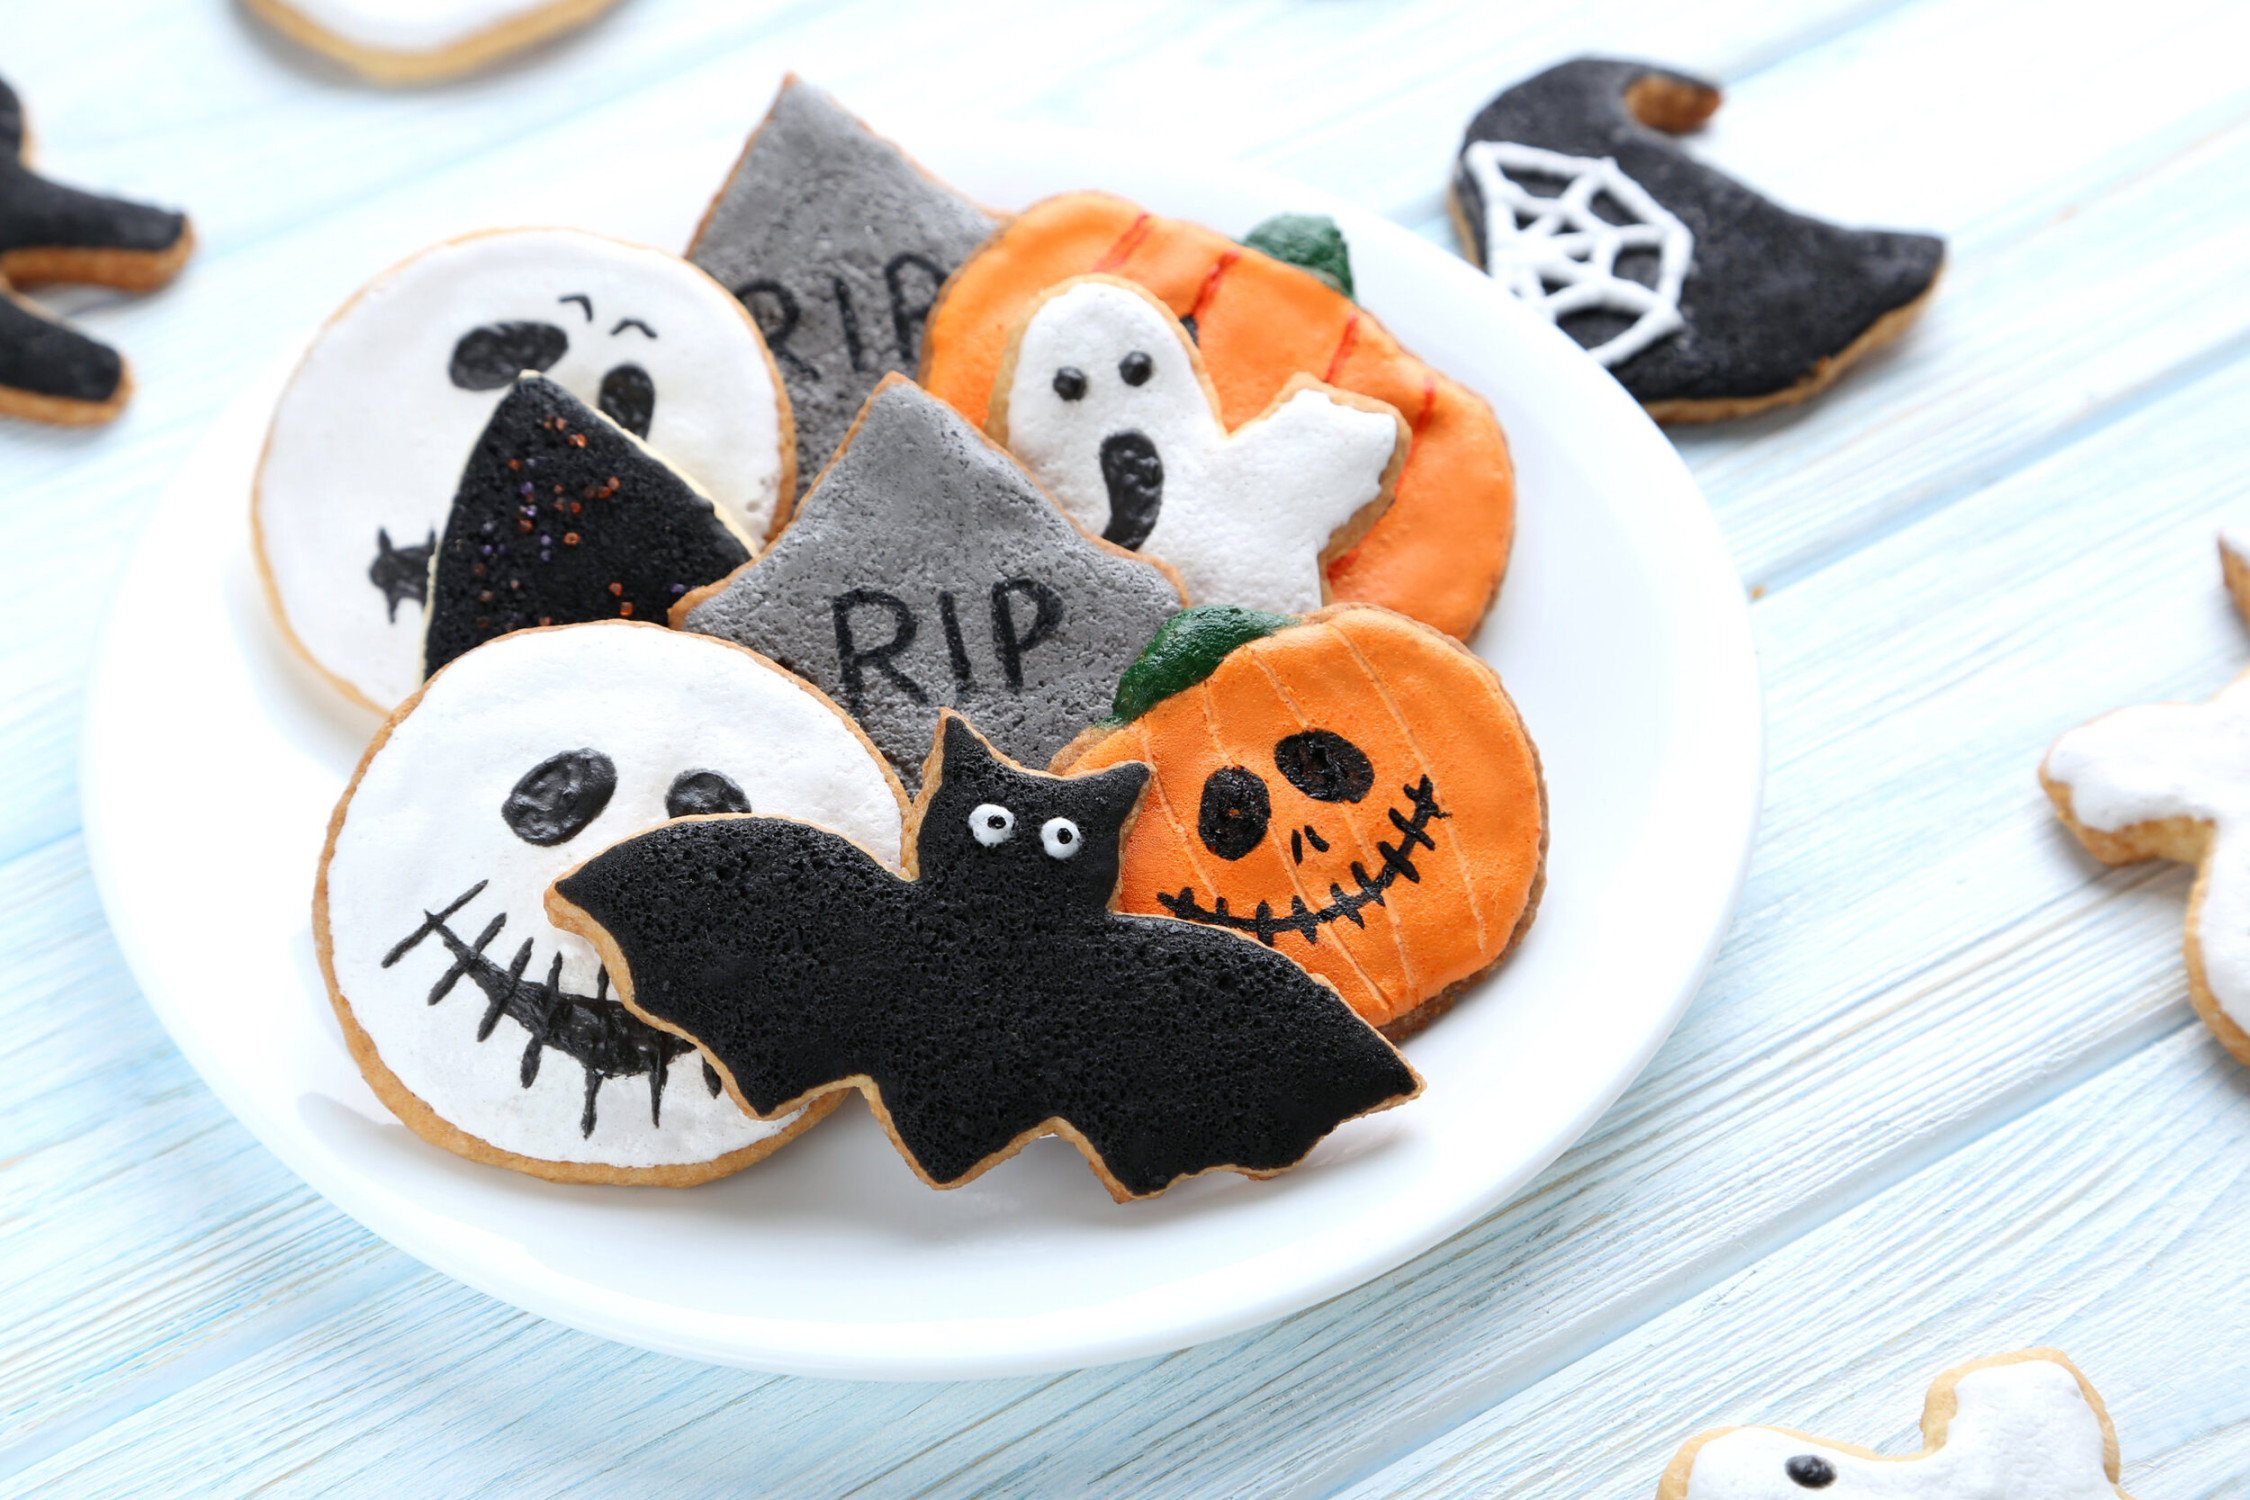 Thriller Tips for Decorating Scary-Good Halloween Cookies